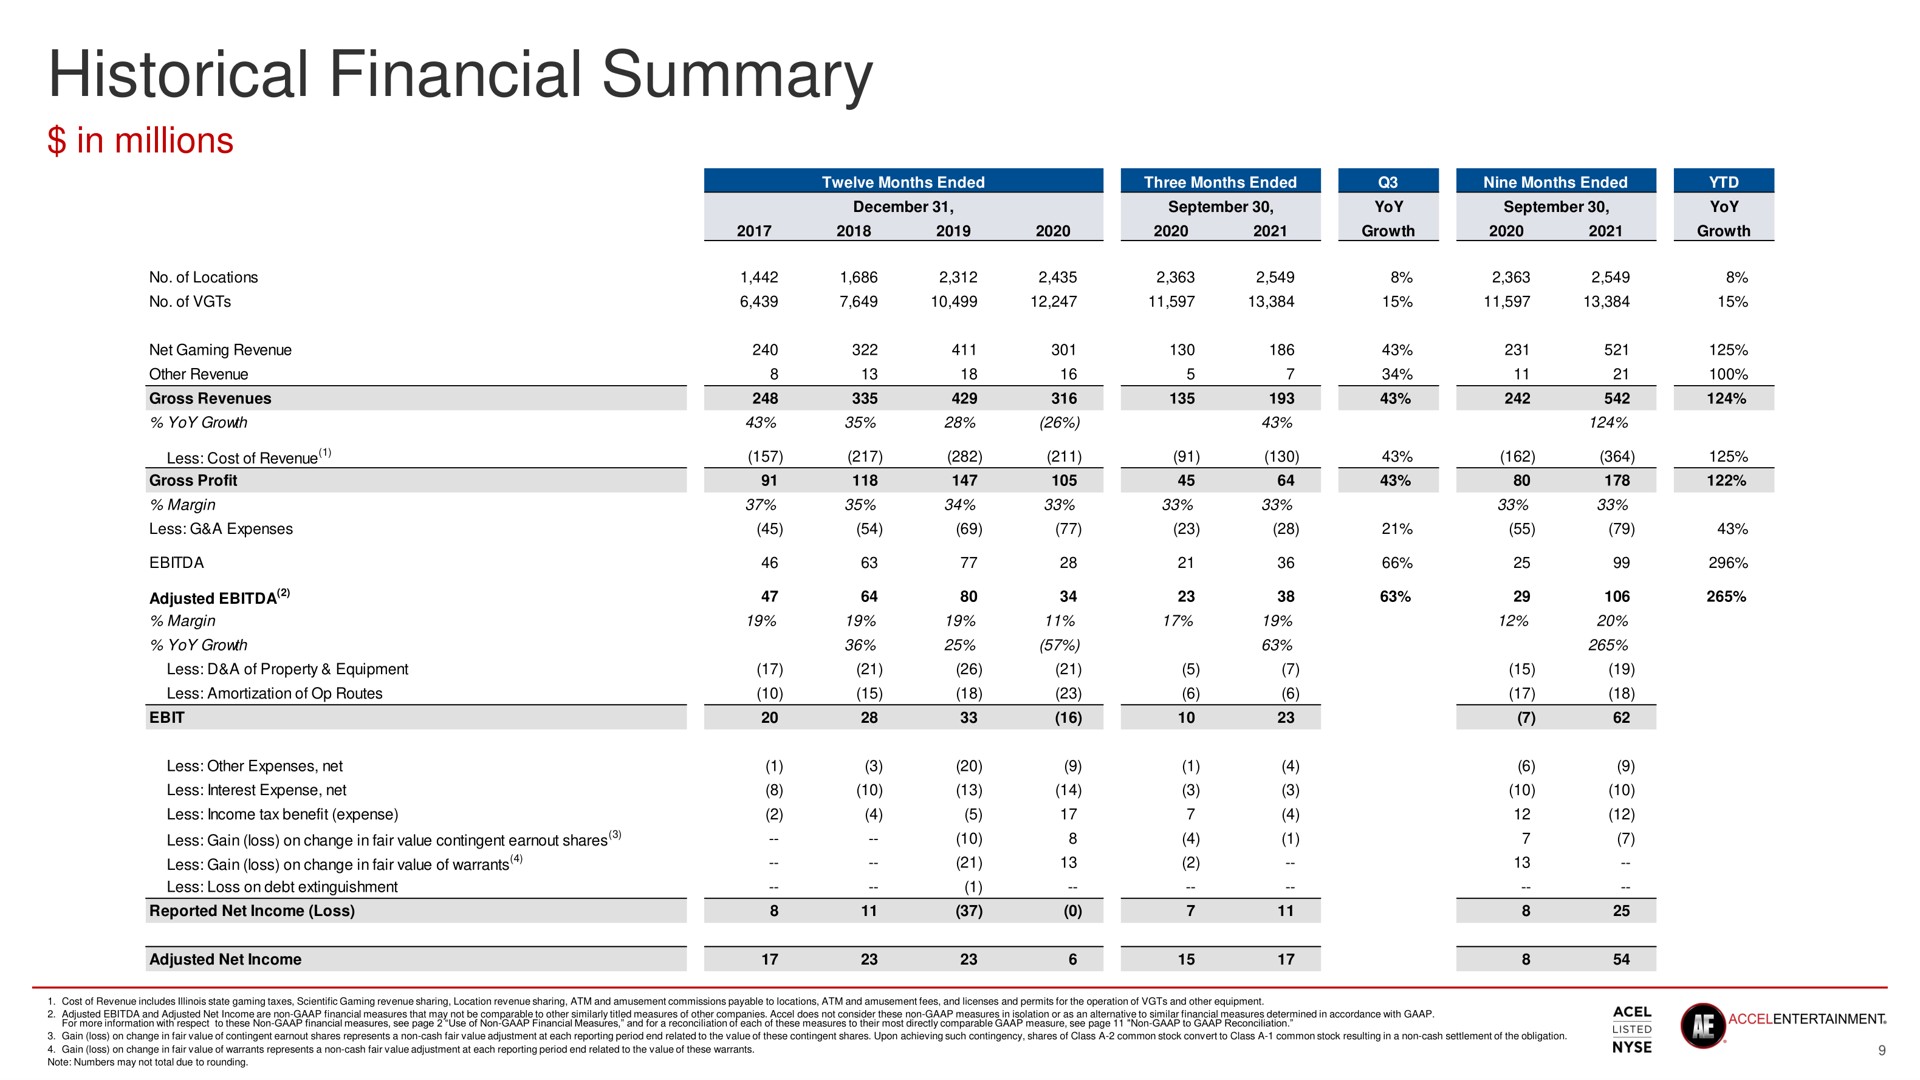 historical financial summary in millions | Accel Entertaiment